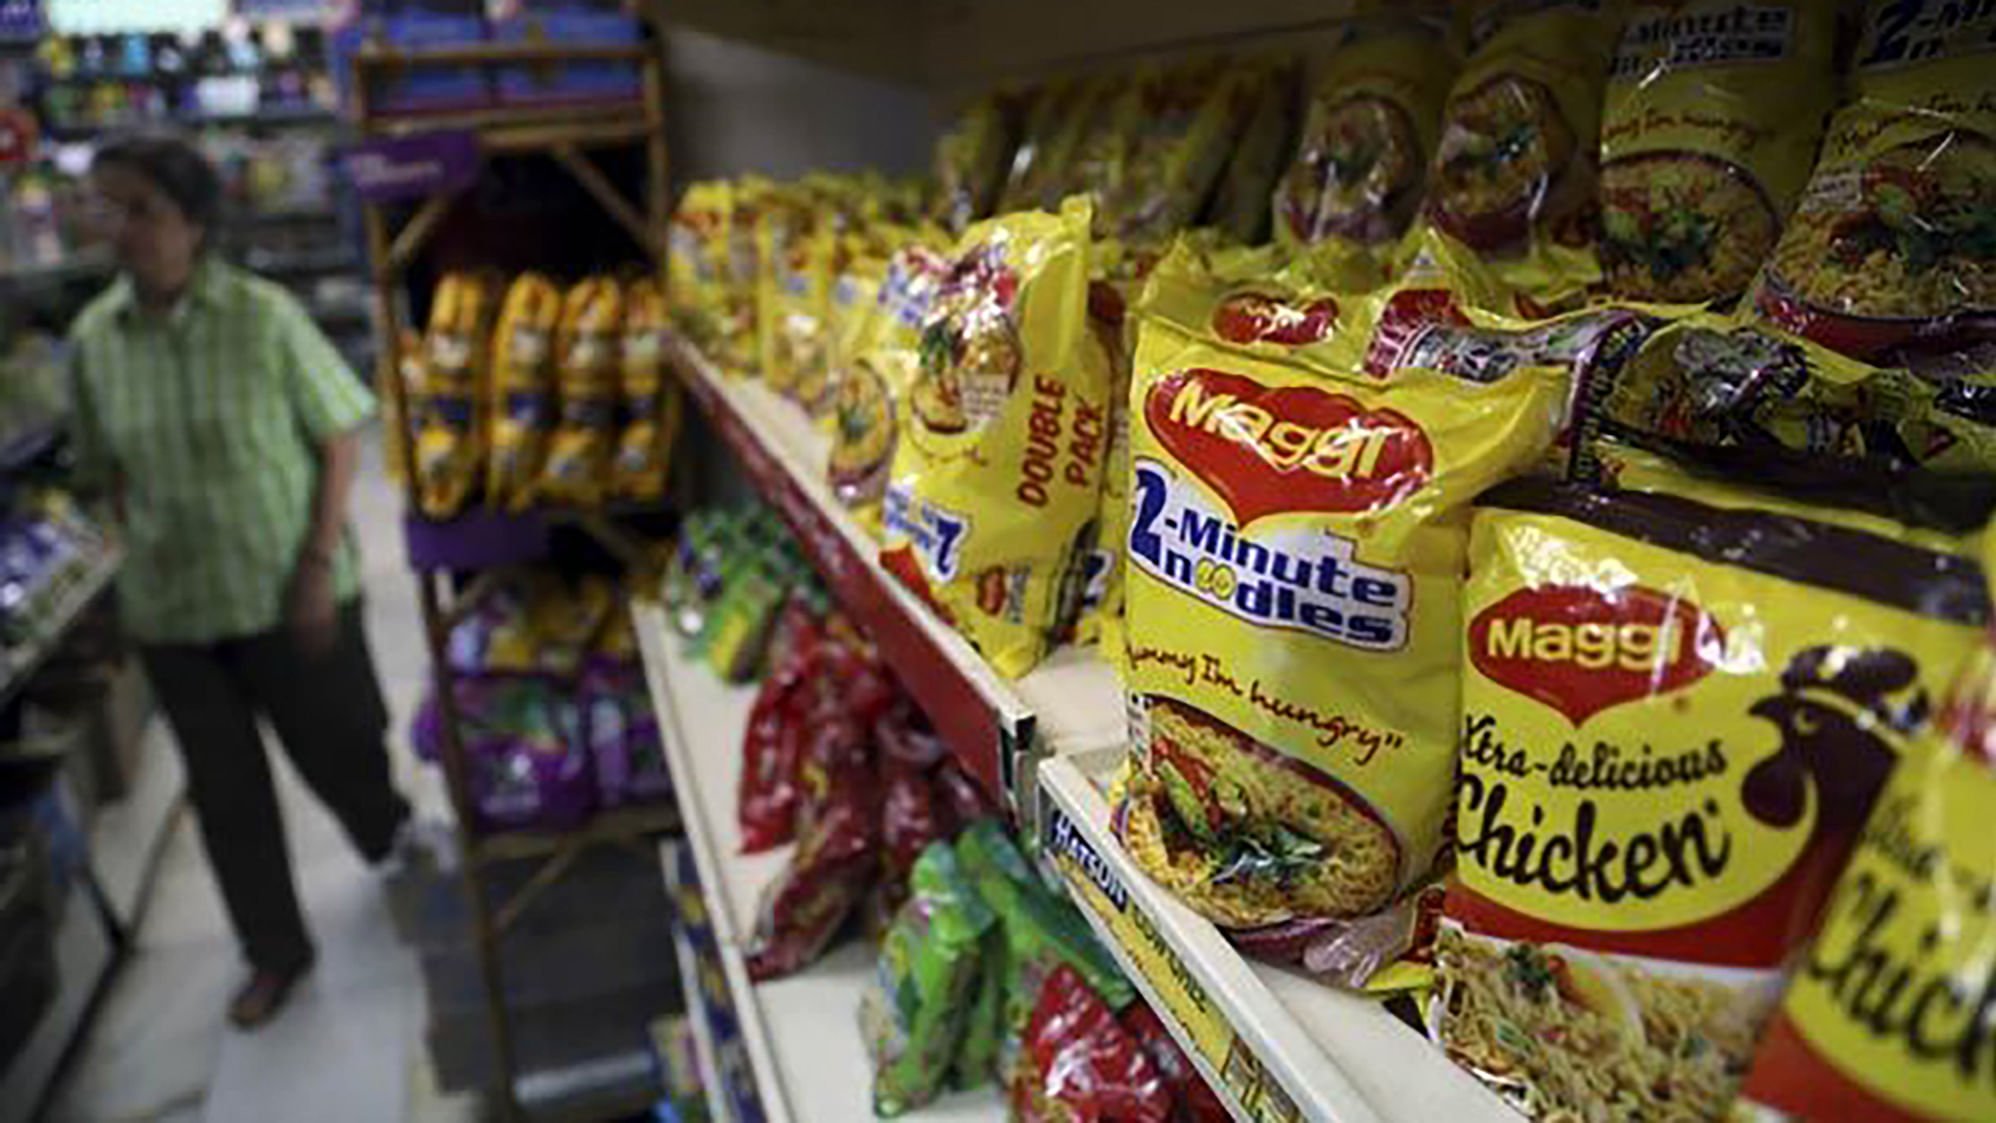 Maggi packets displayed on the shelves. (Photo: PTI)